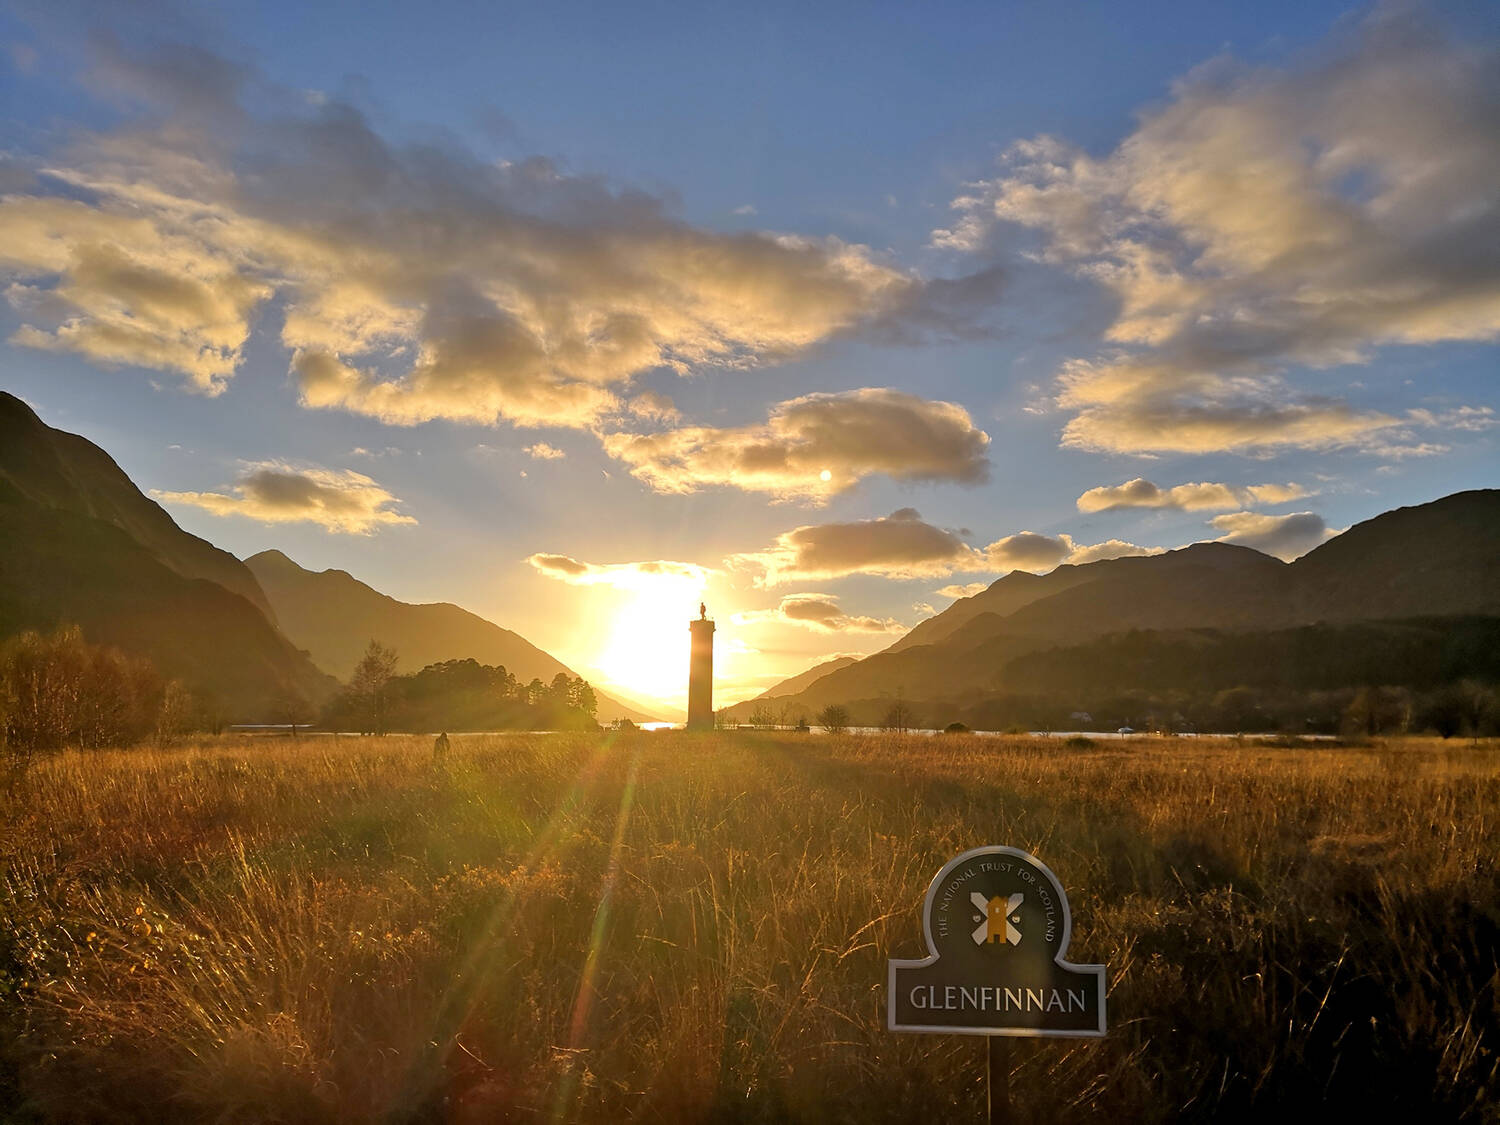 The sun sets over a loch, centred in a narrowing glen. Silhouetted against the sunset is a tall, thin column with a statue on top. A sign reading Glenfinnan stands in the field in the foreground.